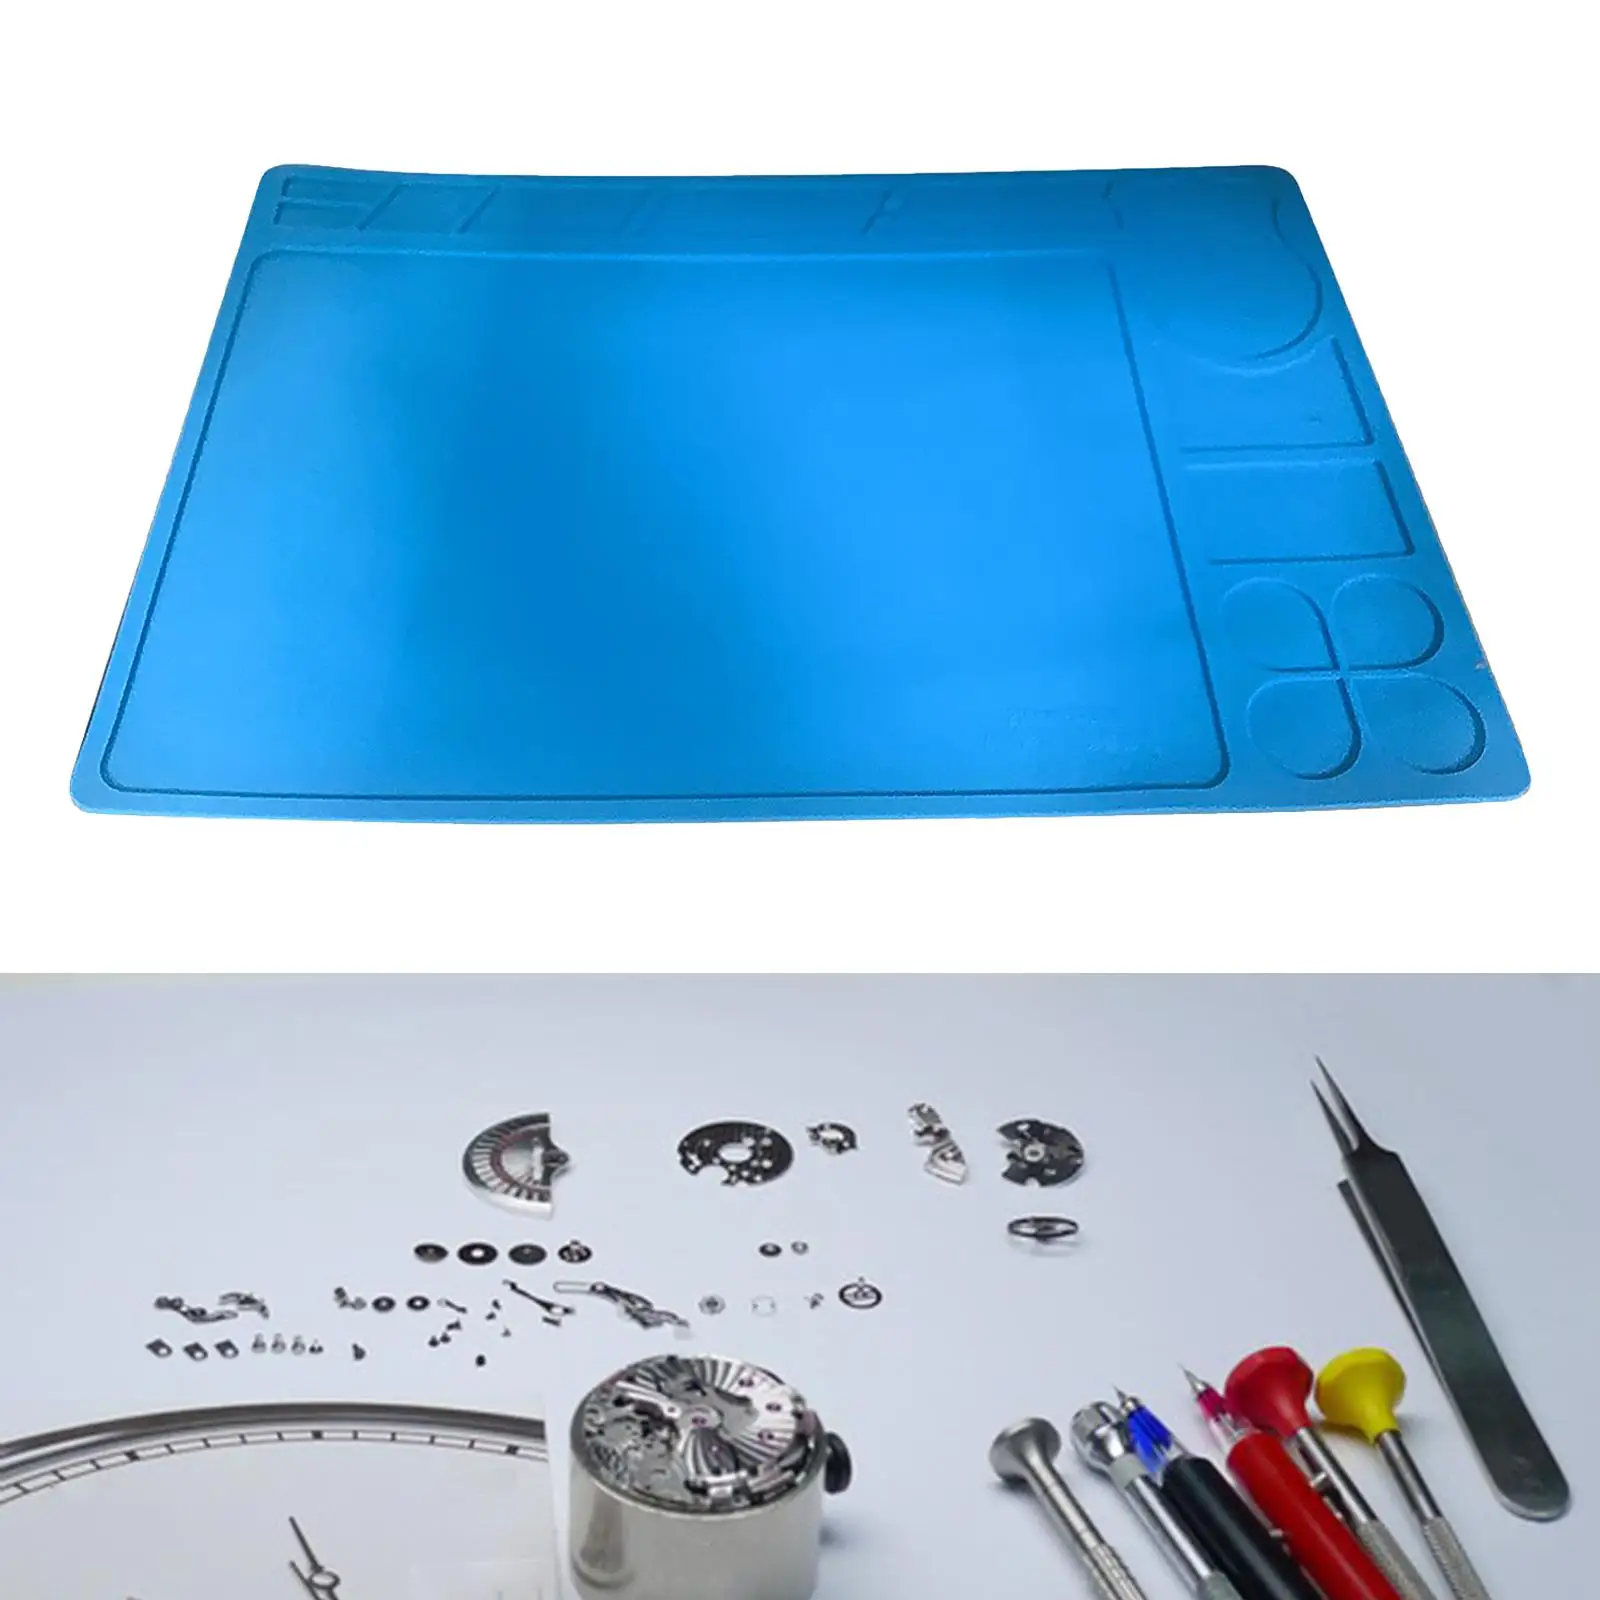 Heat Insulation Silicone Repair Mat with Scale Ruler and Screw Position